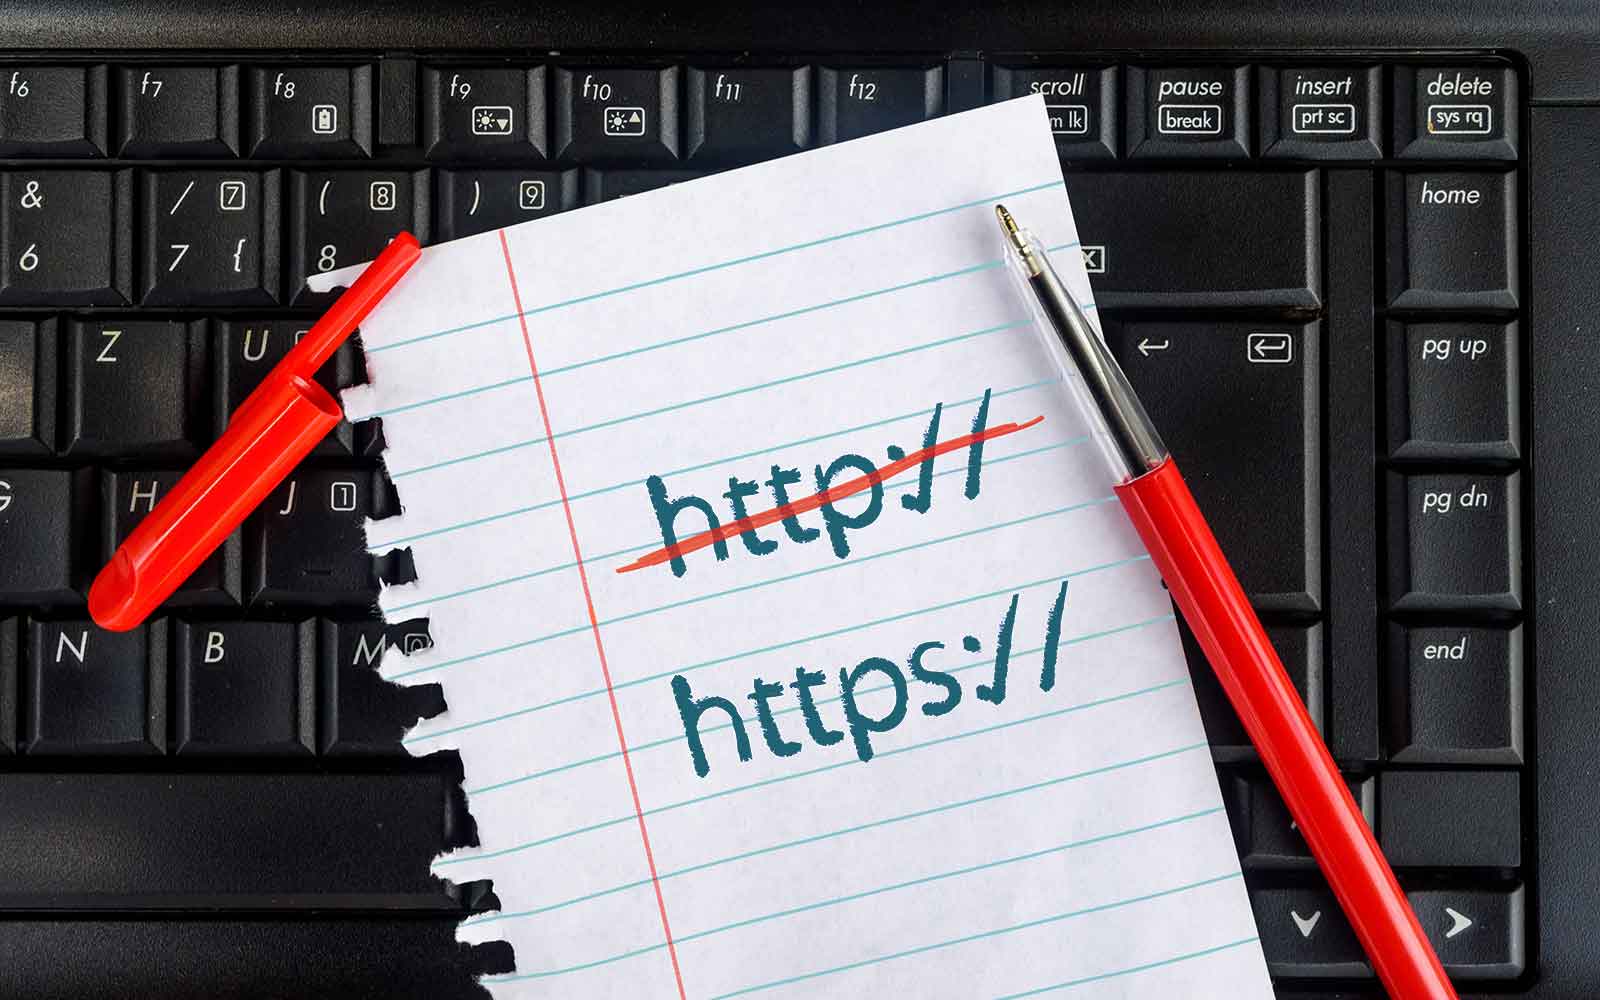 HTTP vs HTTPS feature graphic shows a piece of paper with HTTP crossed out and HTTPS remaining